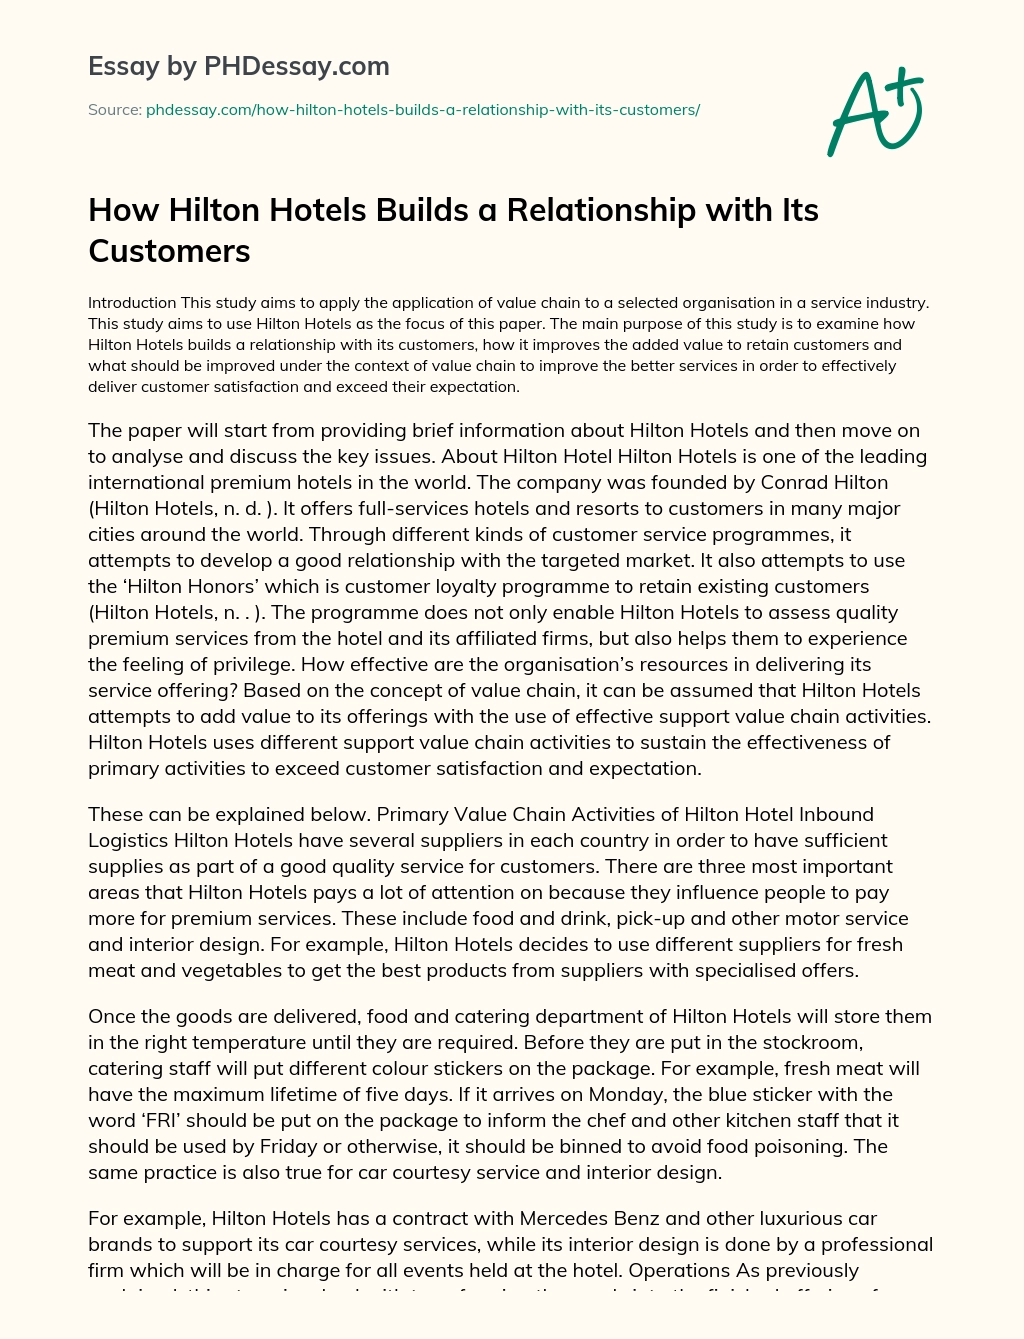 How Hilton Hotels Builds a Relationship with Its Customers essay